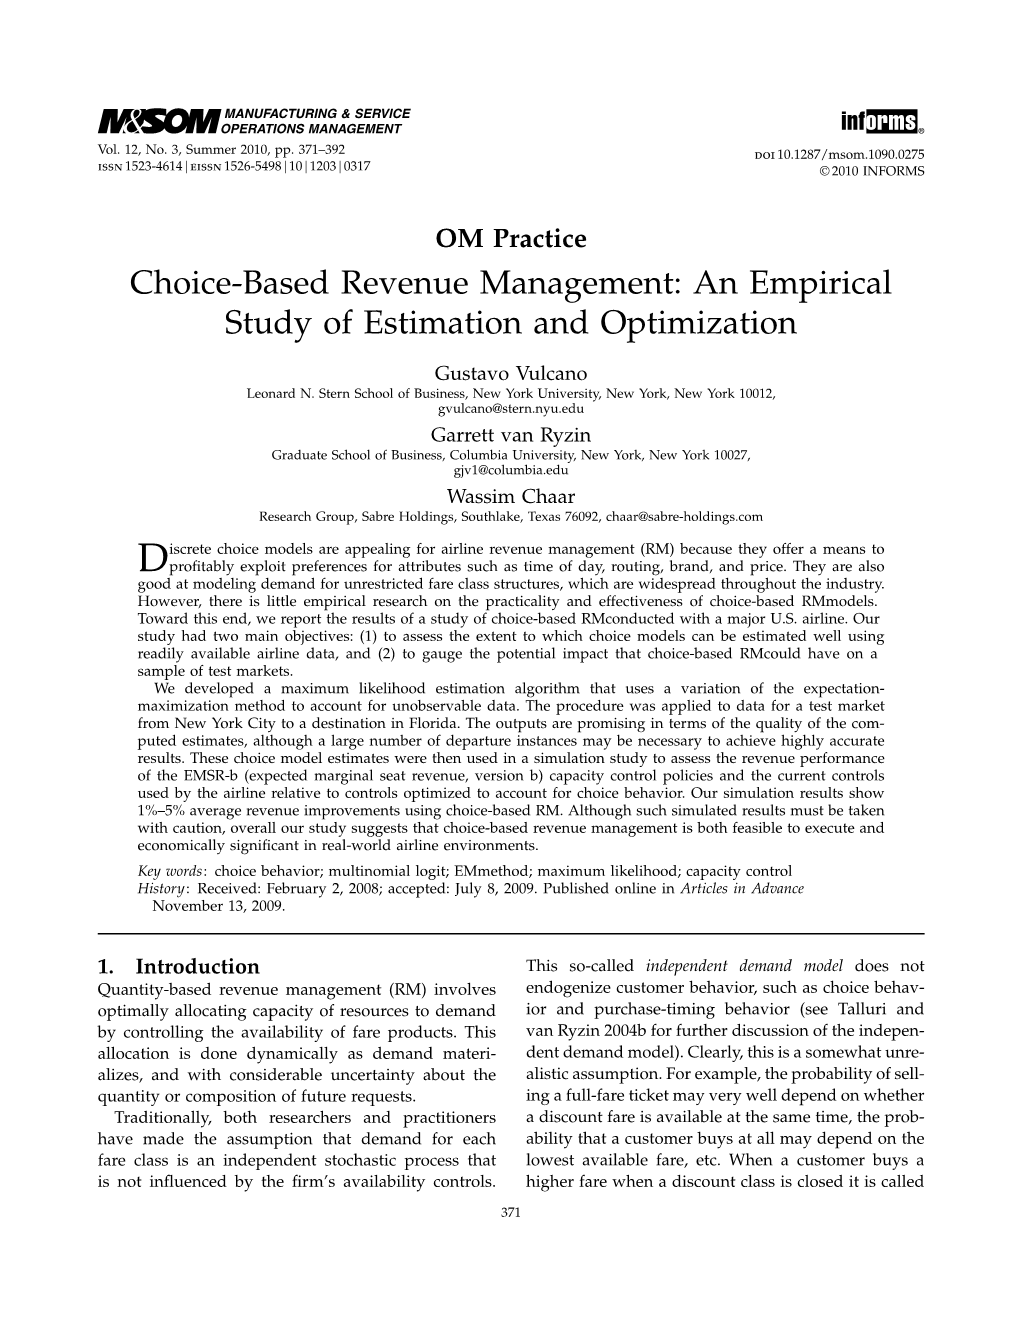 Choice-Based Revenue Management: an Empirical Study of Estimation and Optimization